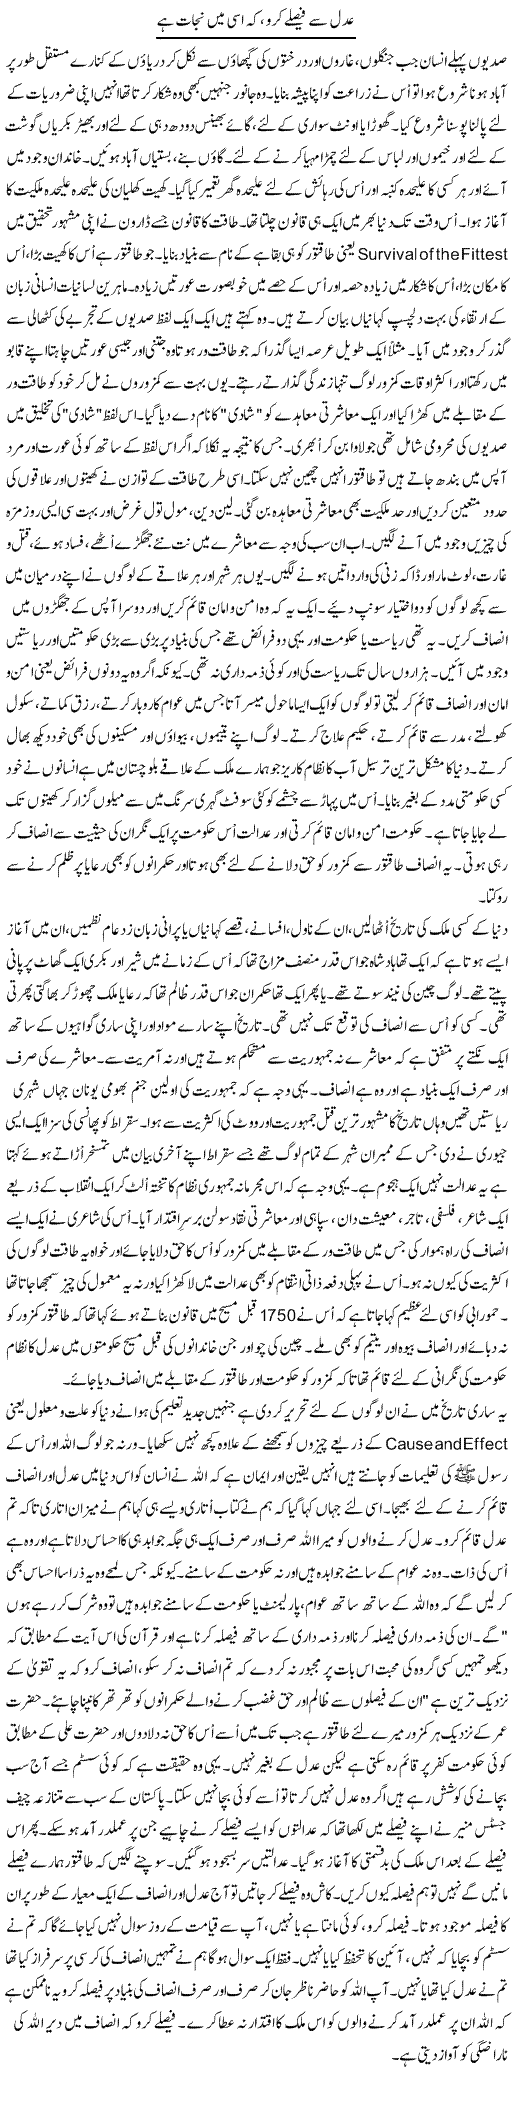 Decide With Justice Express Column Orya Maqbool 9 October 2010